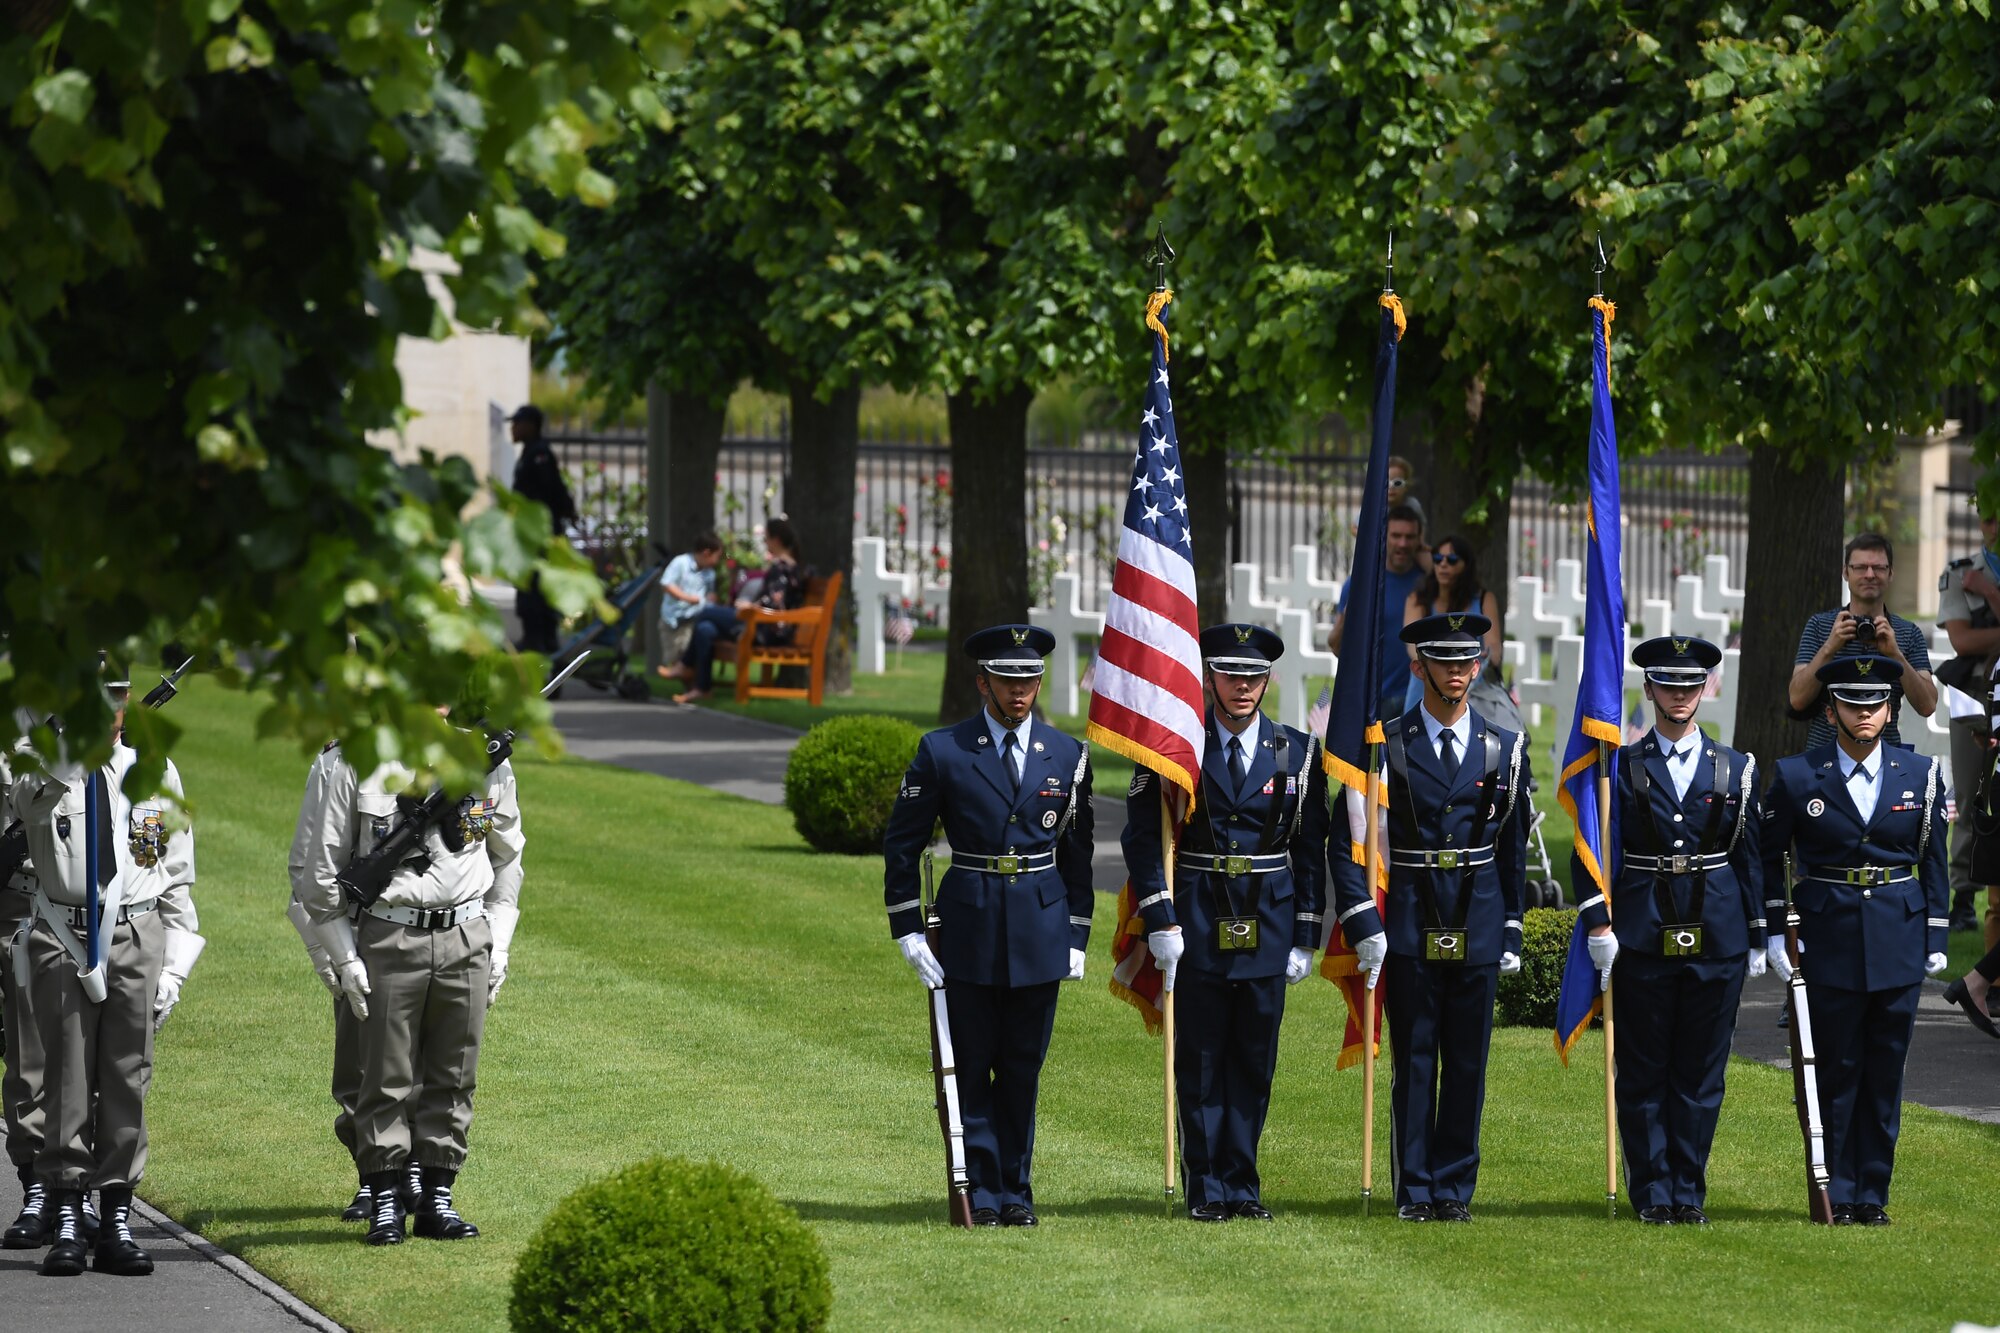 An honor guard detail from Spangdahlem Air Base, Germany, participates in a Memorial Day ceremony alongside their French counterparts at Suresnes American Cemetery.